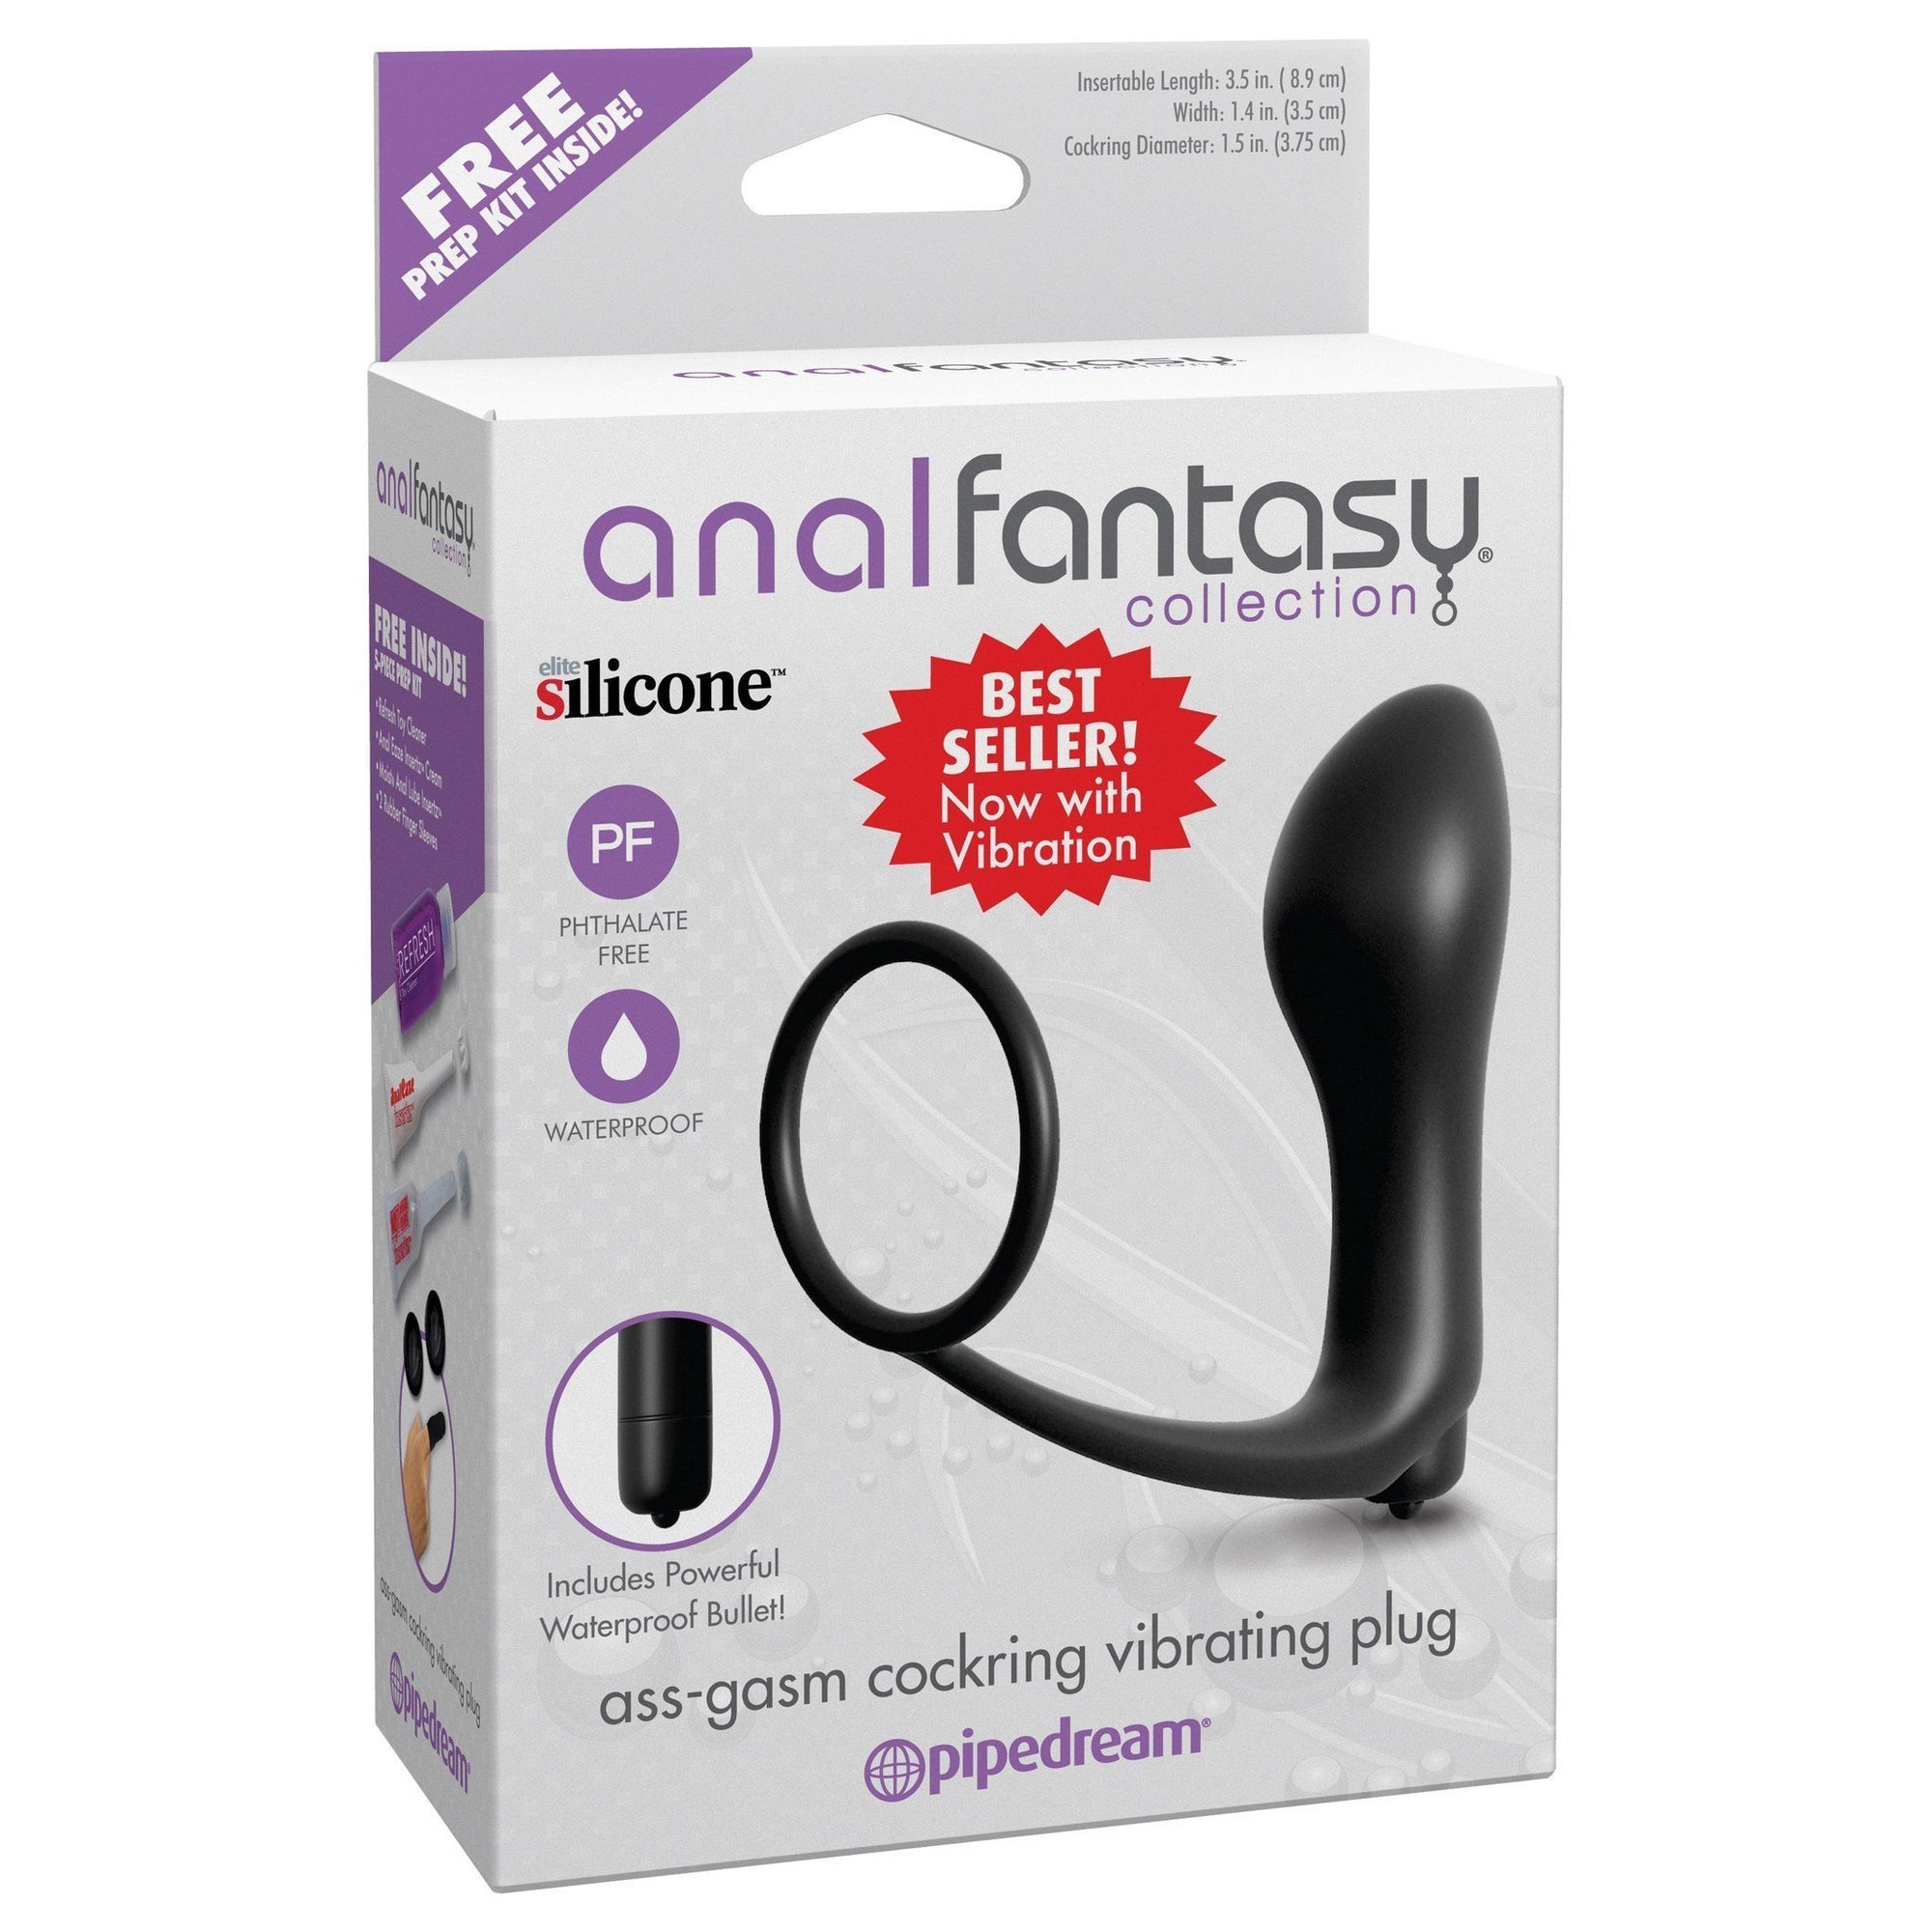 Pipedream - Anal Fantasy Collection Ass-Gasm Cockring Vibrating Plug (Black) Silicone Cock Ring (Vibration) Non Rechargeable - CherryAffairs Singapore